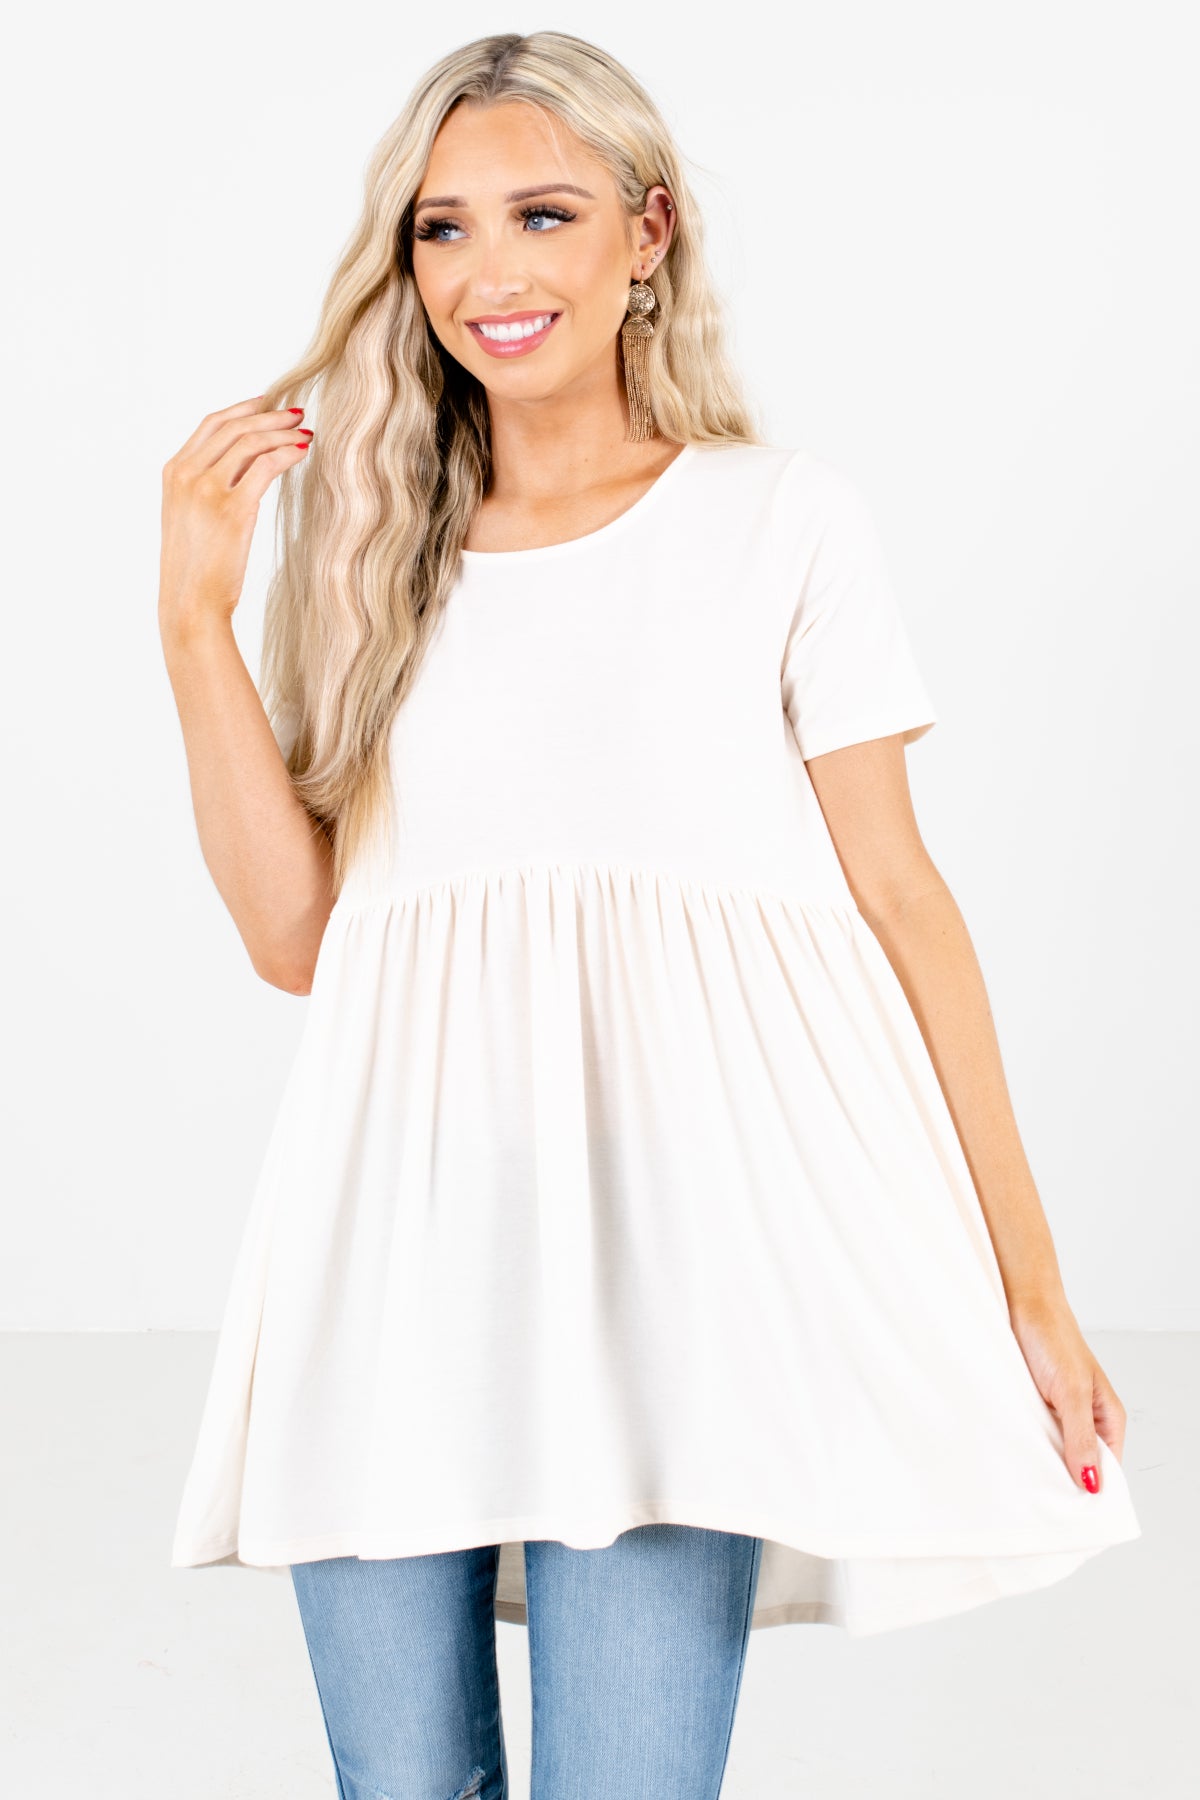 White Flowy Silhouette Boutique Tops for Women